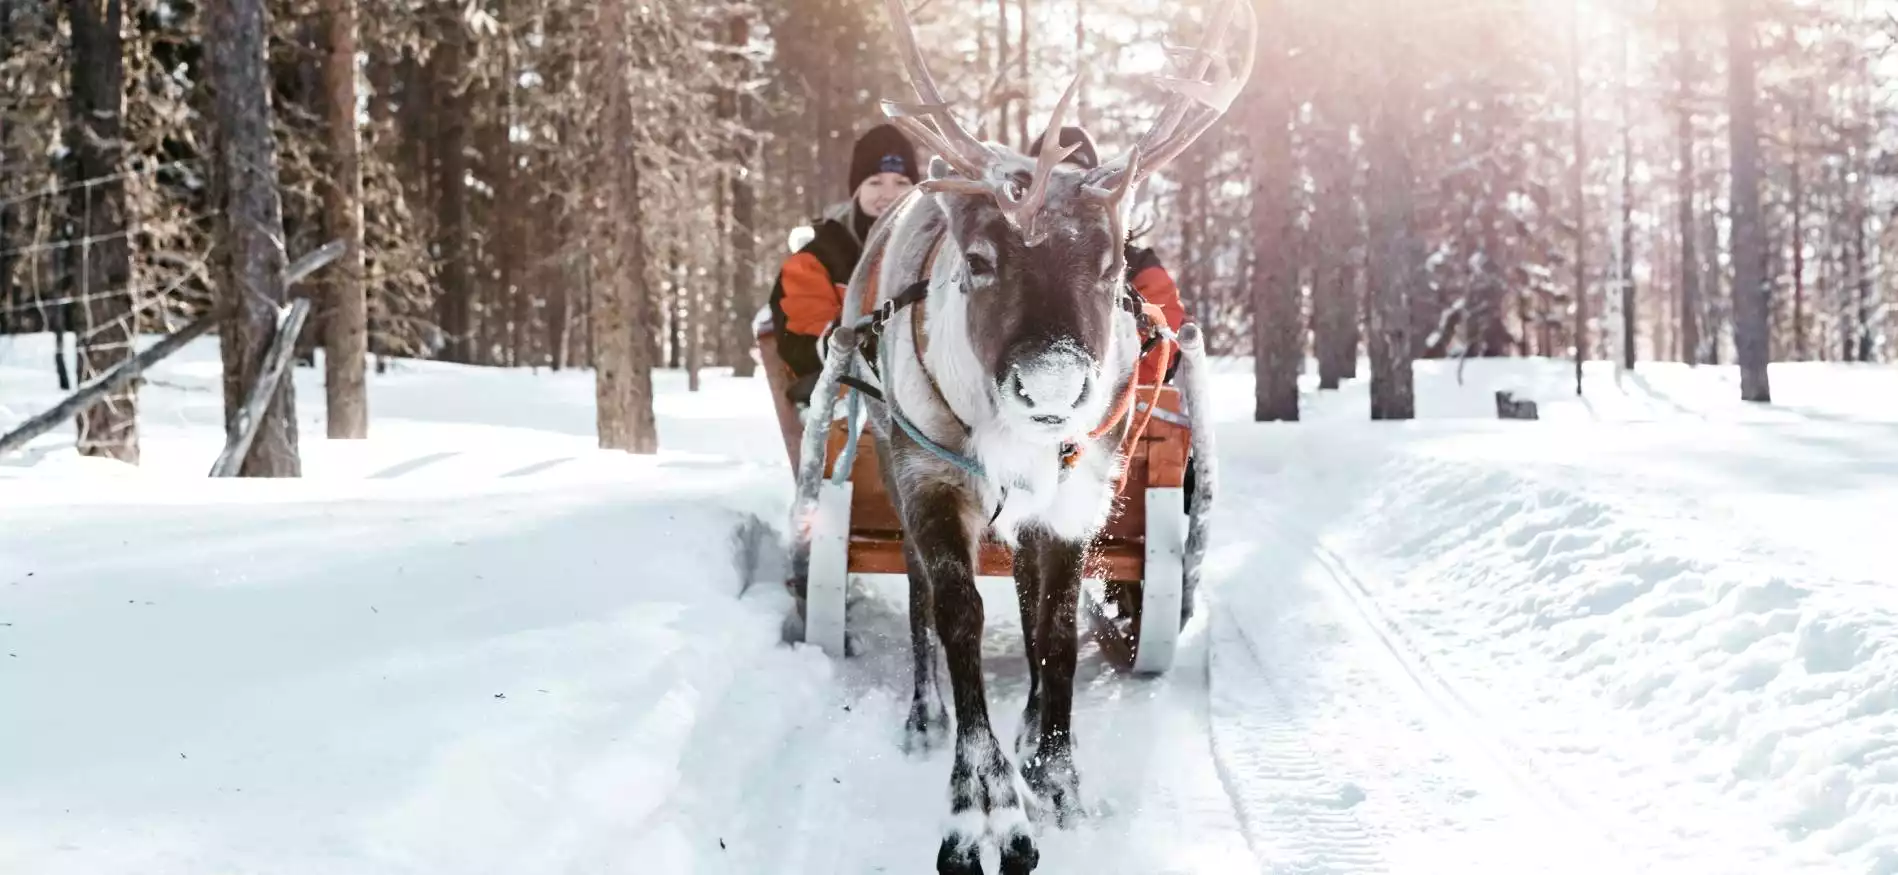 All you need is Lapland